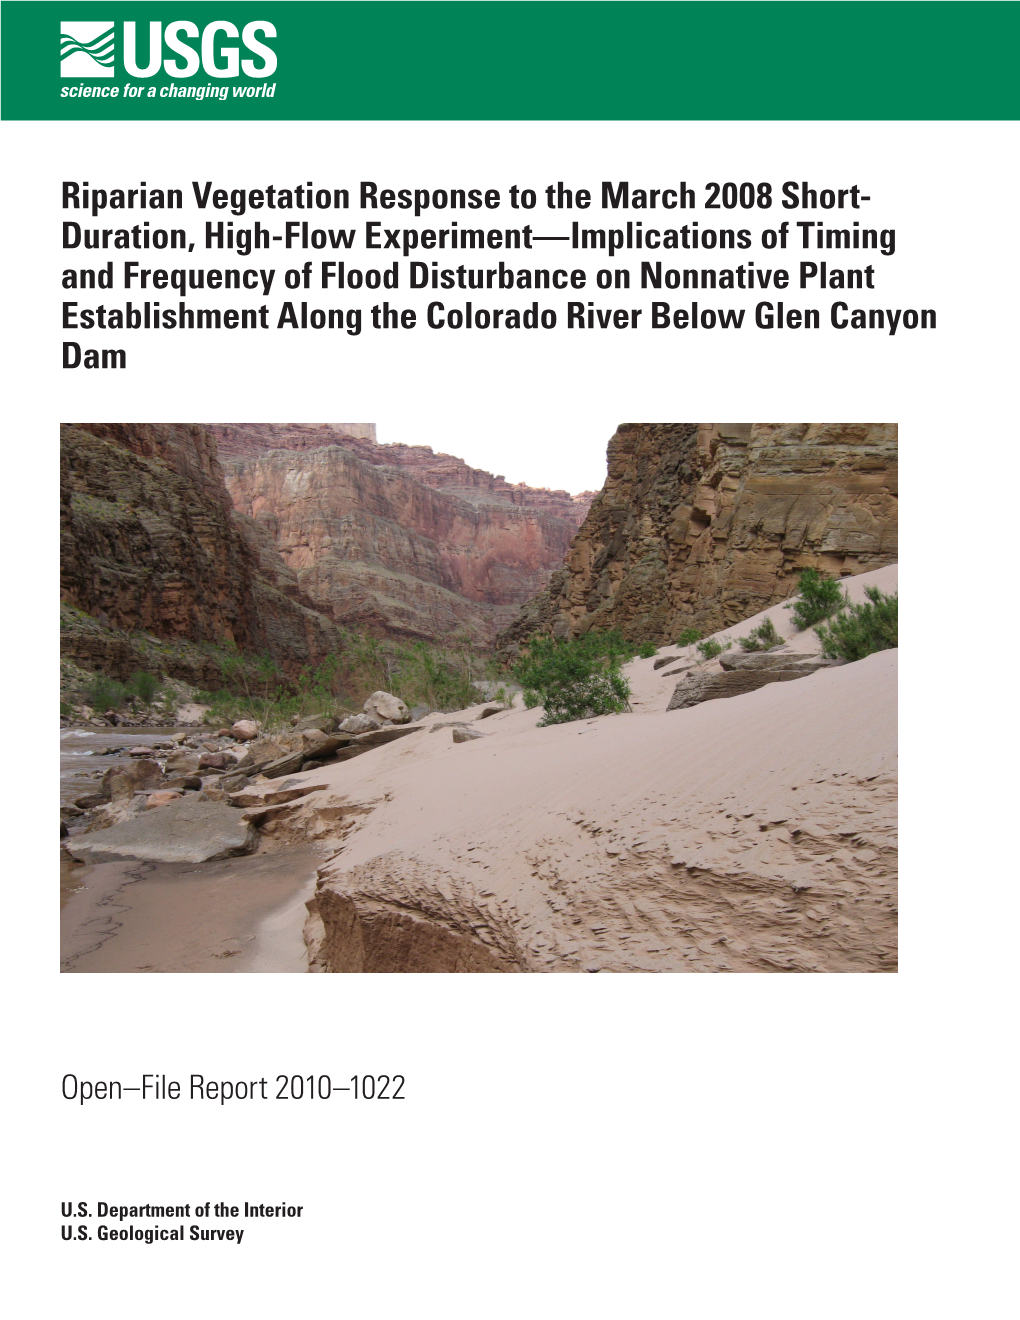 Riparian Vegetation Response to the March 2008 Short-Duration, High